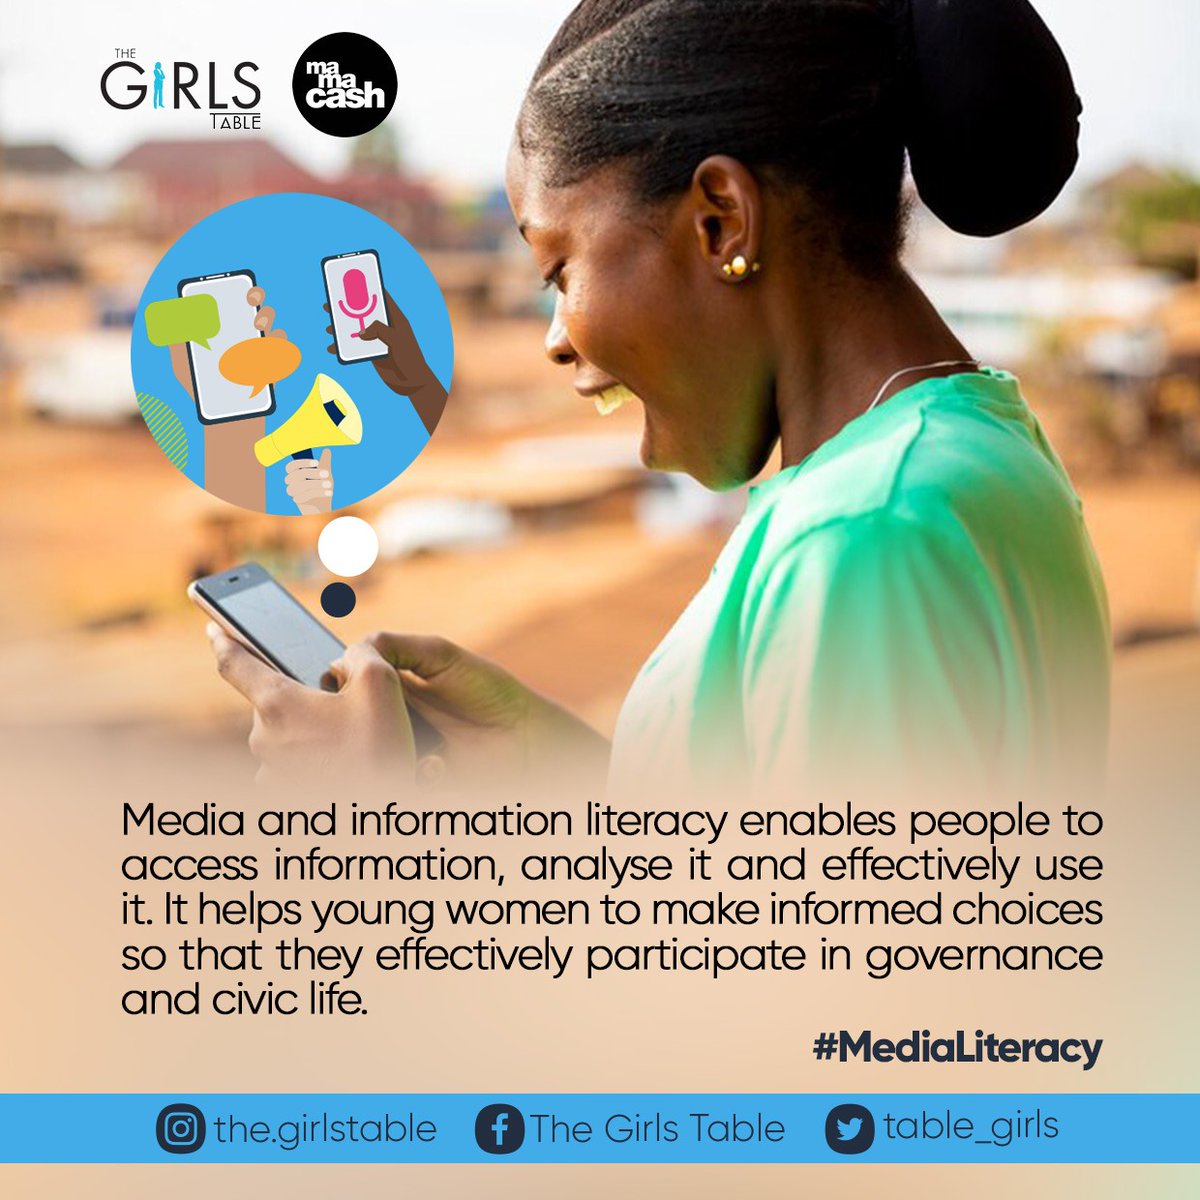 When young women have access to accurate and verified information, they are able to make informed decisions that enable them to actively participate in governance and civic processes. #MediaLiteracy